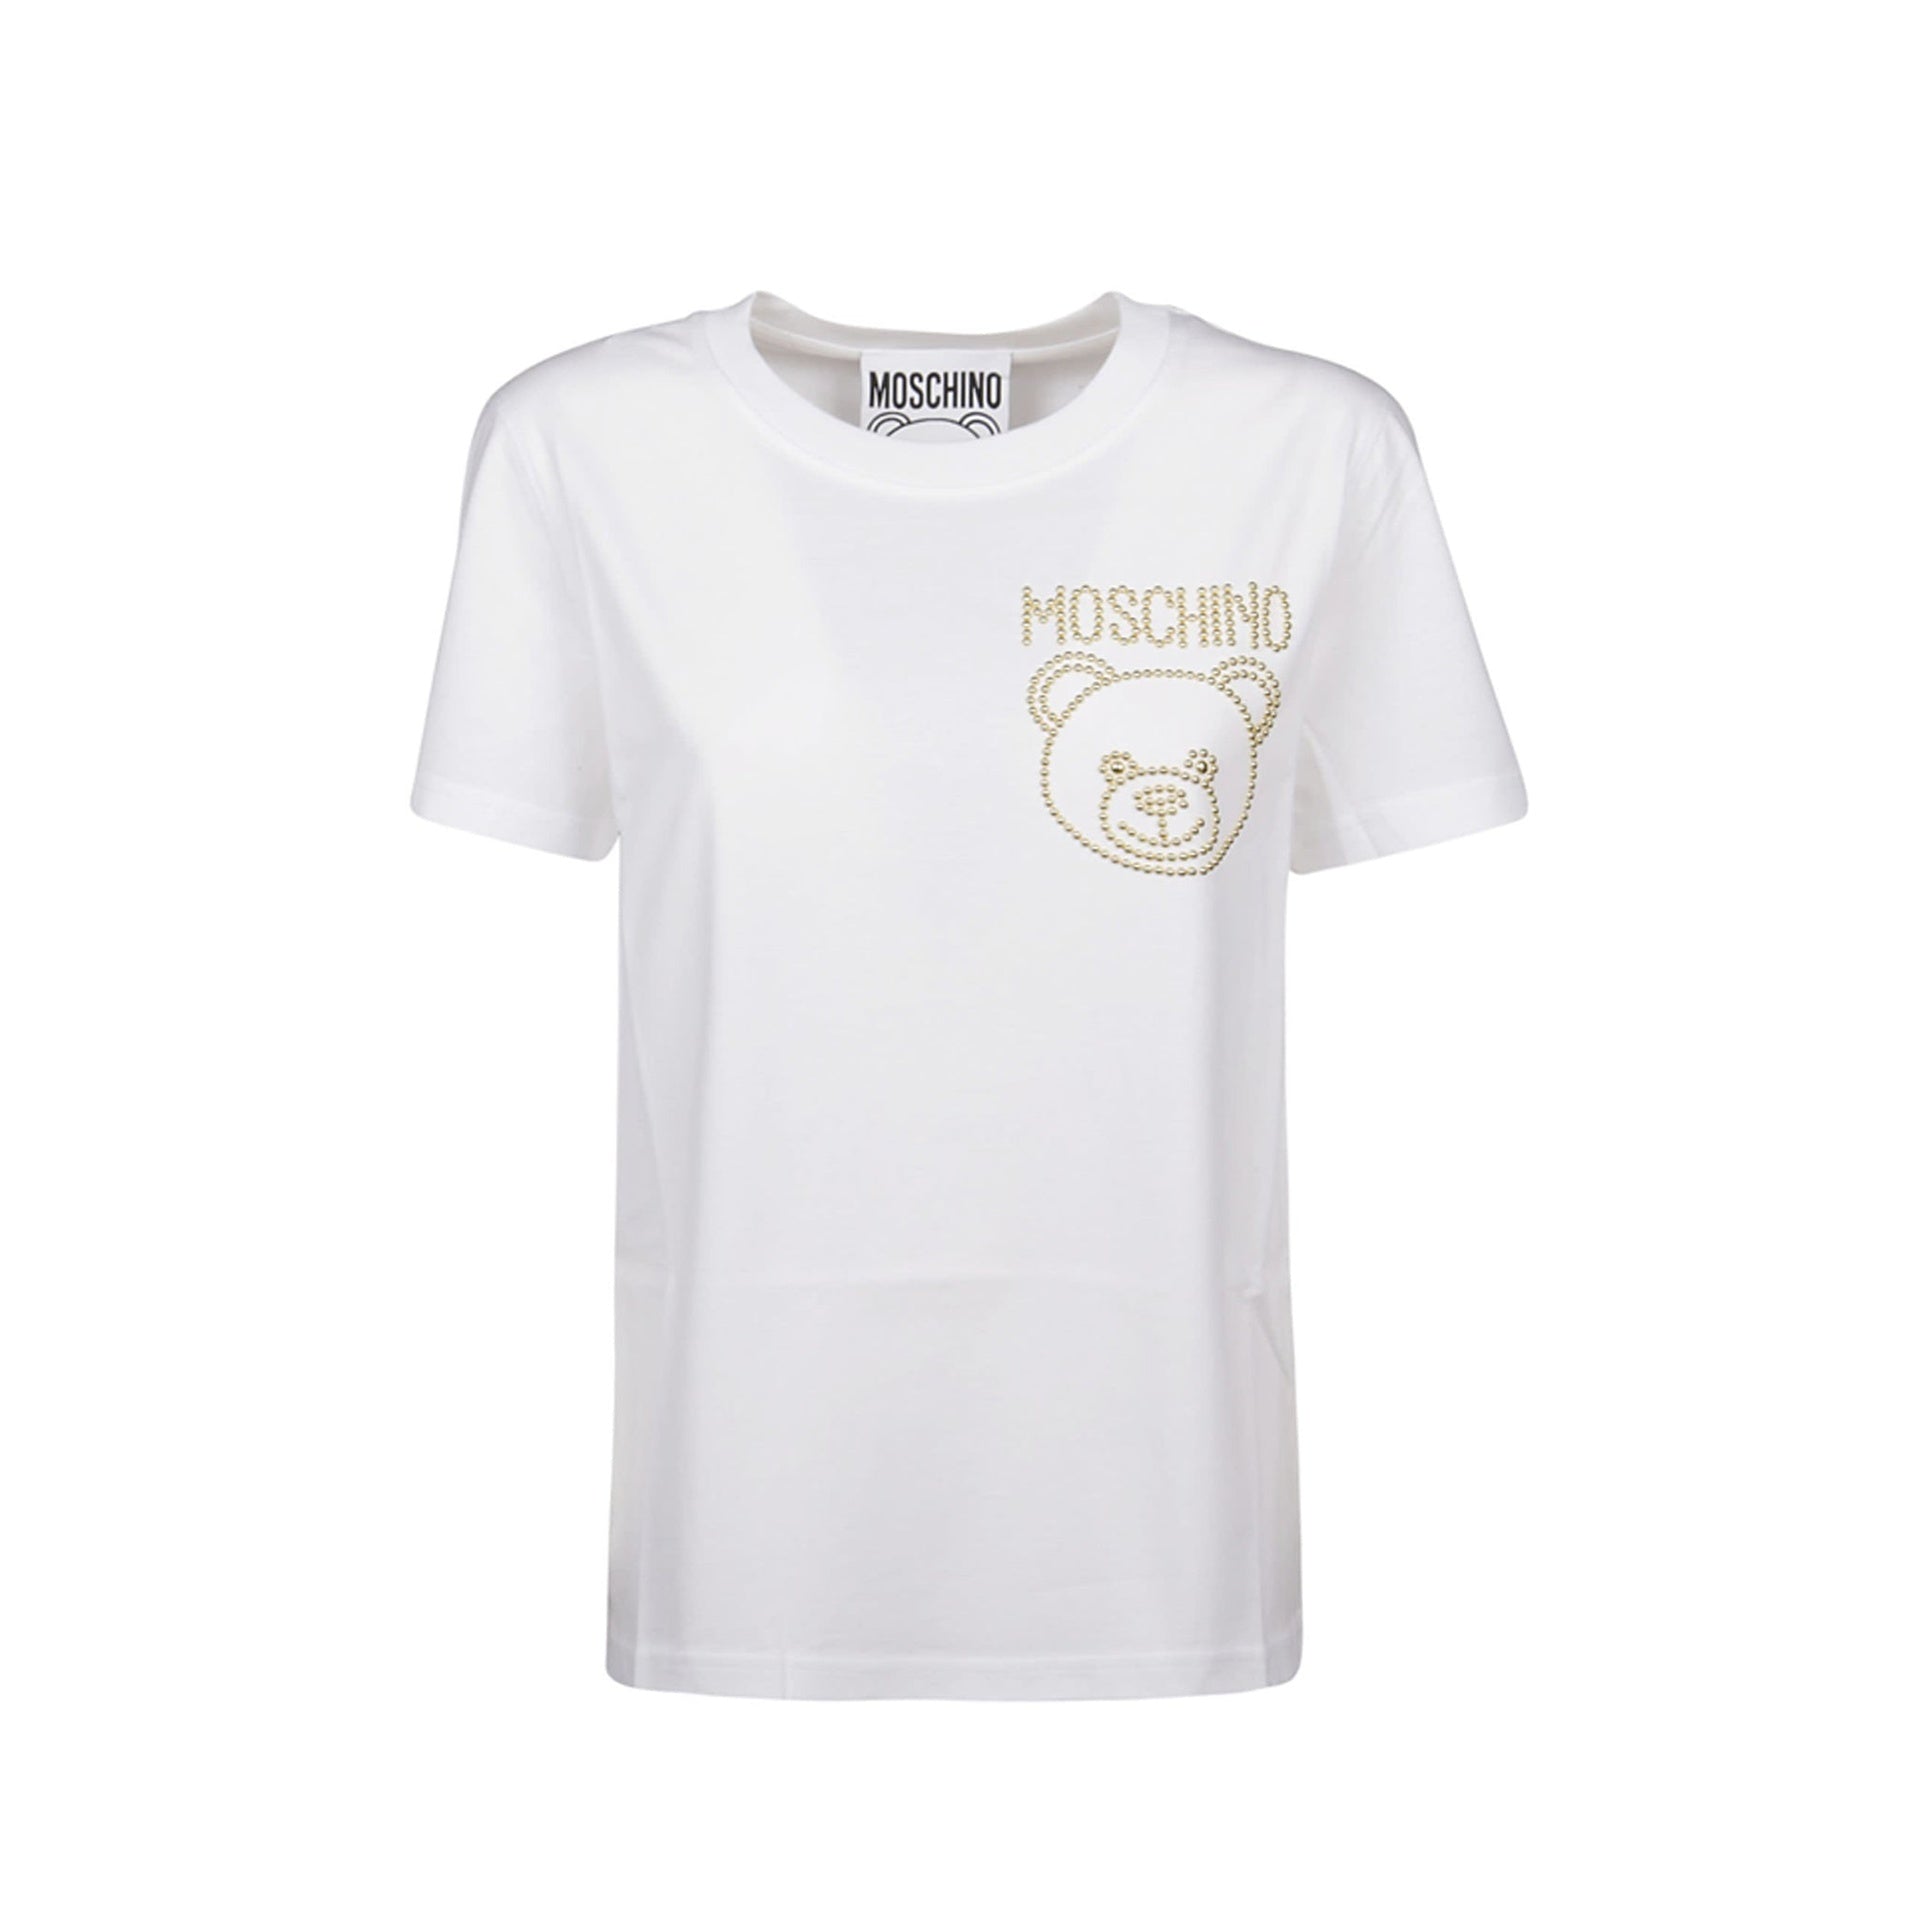 MOSCHINO-COUTURE-OUTLET-SALE-Moschino-Couture-Cotton-Logo-T-Shirt-Shirts-WHITE-42-ARCHIVE-COLLECTION.jpg